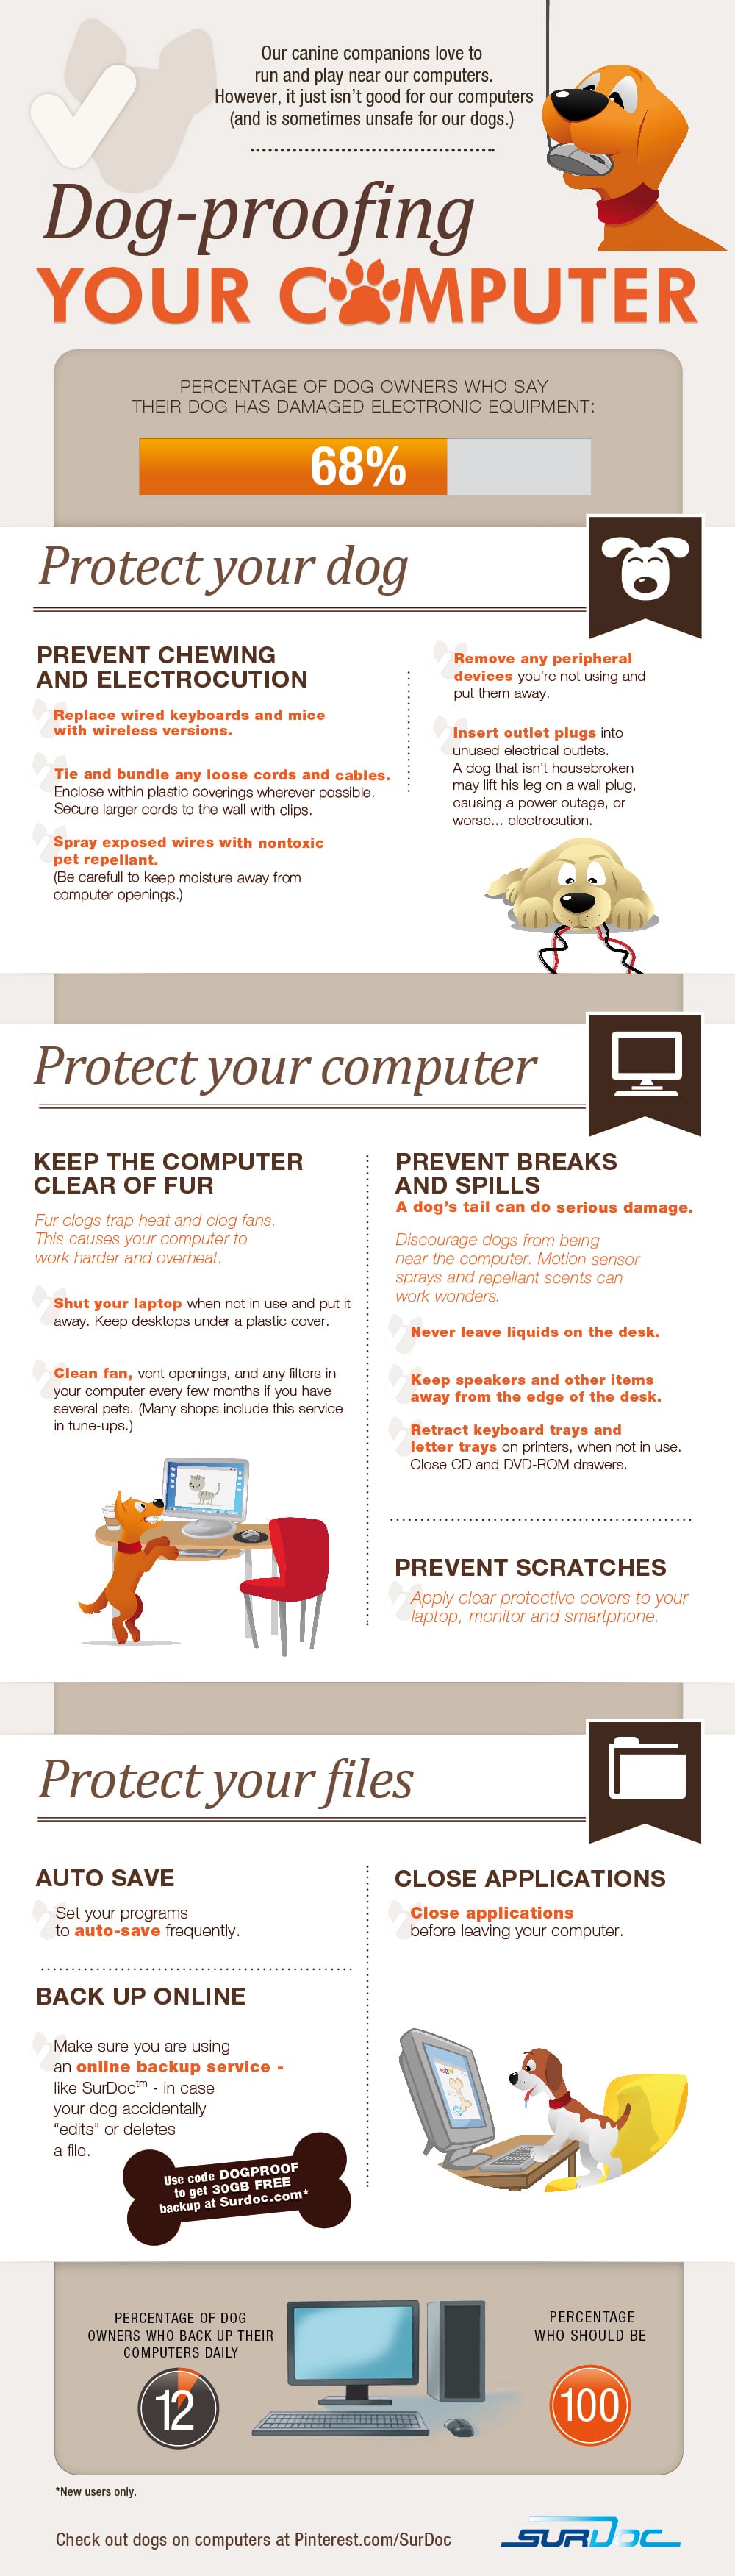 Dog-Proof-Your-Computer-Infographic